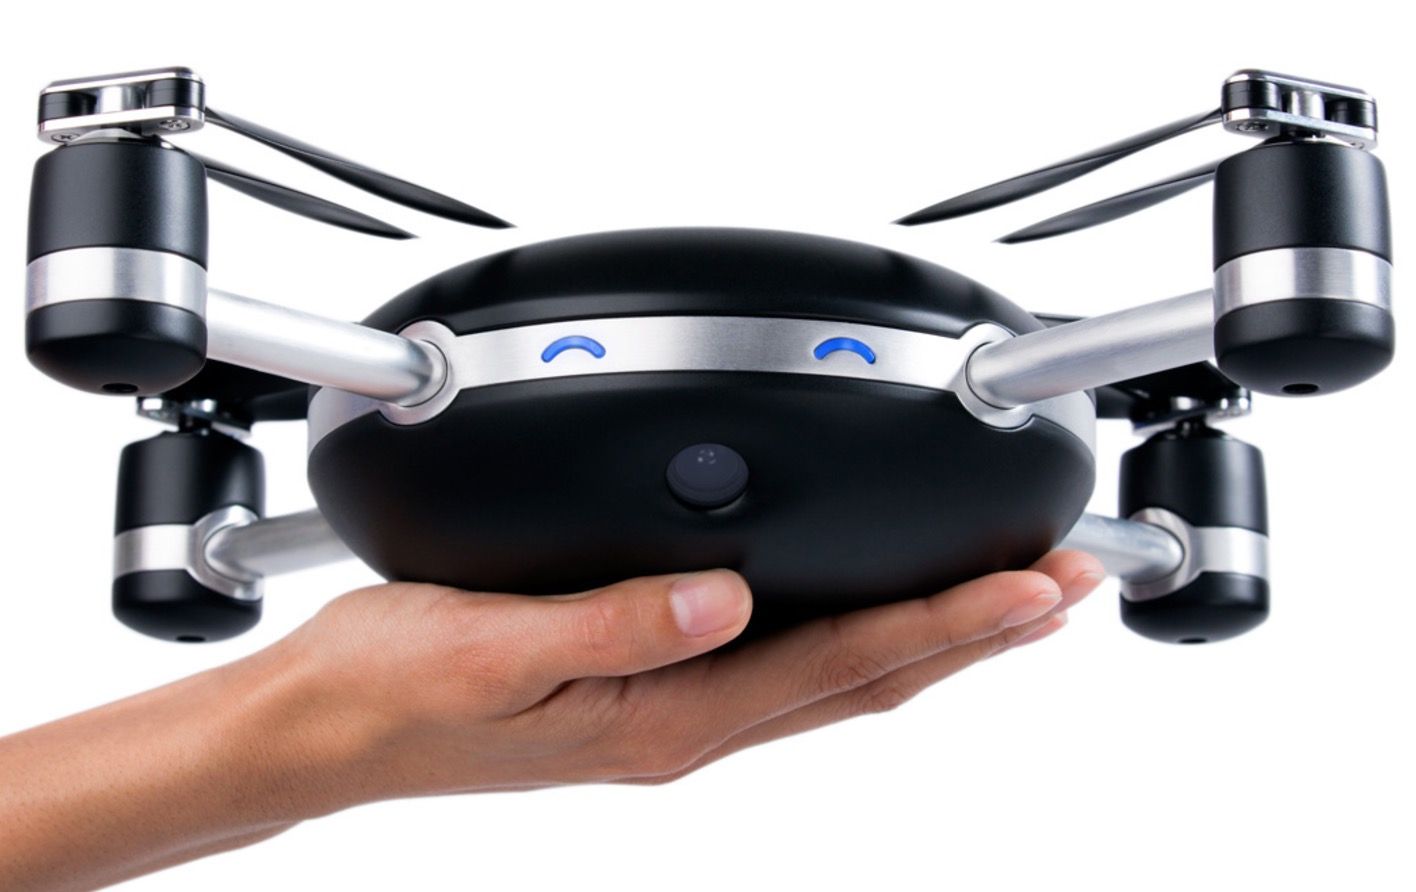 are drones in trouble now lily autonomous drone is shutting down image 1